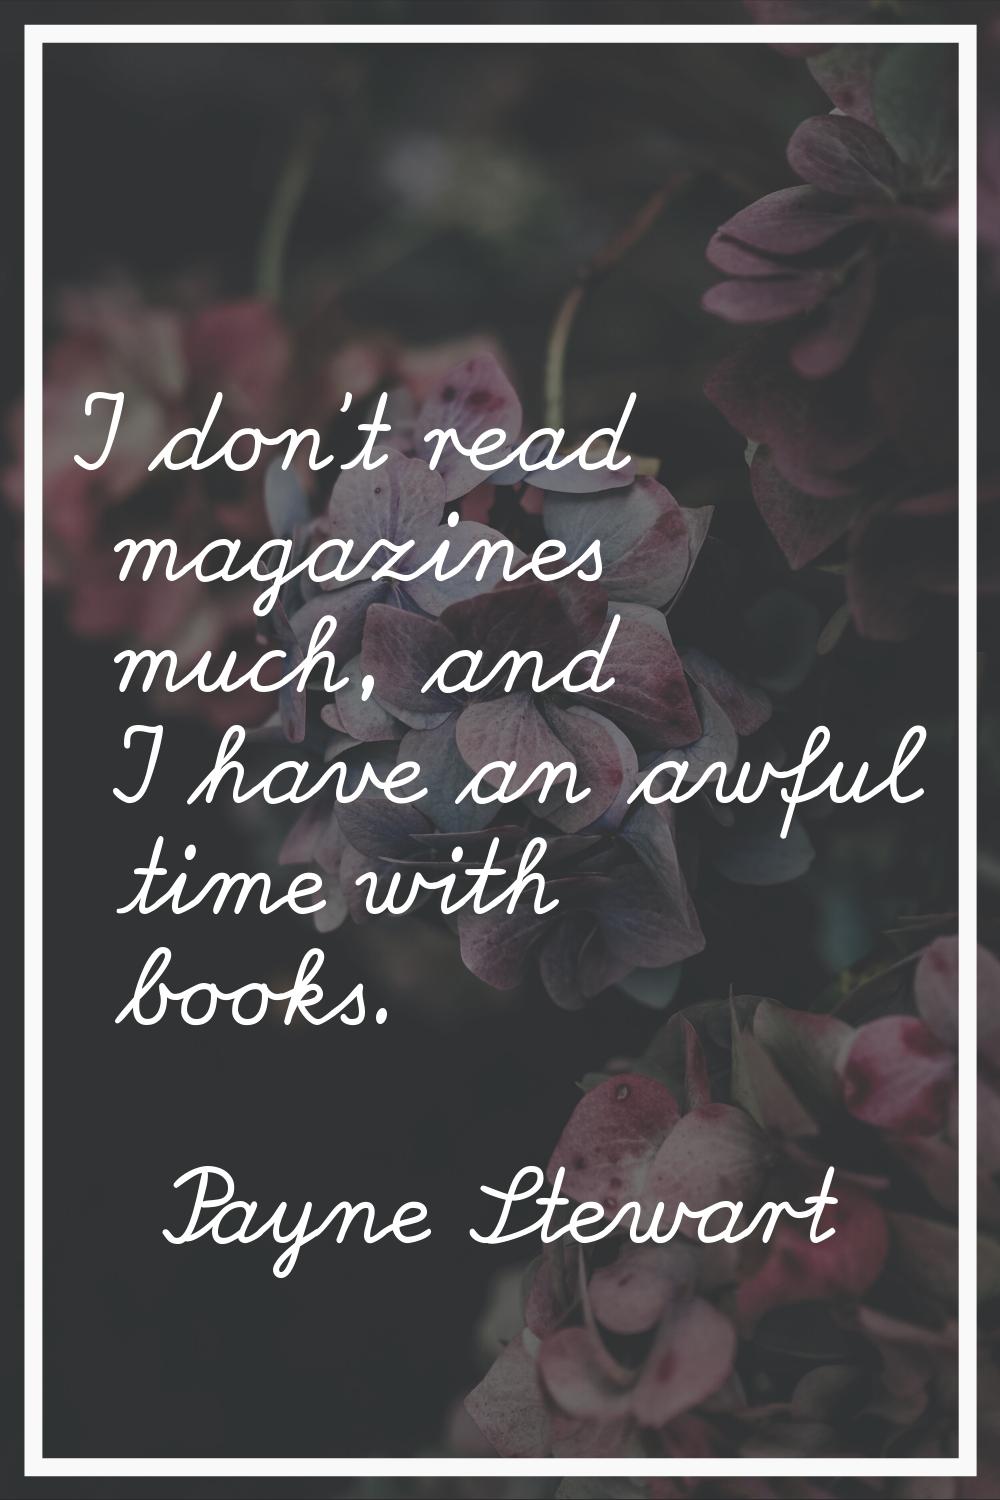 I don't read magazines much, and I have an awful time with books.